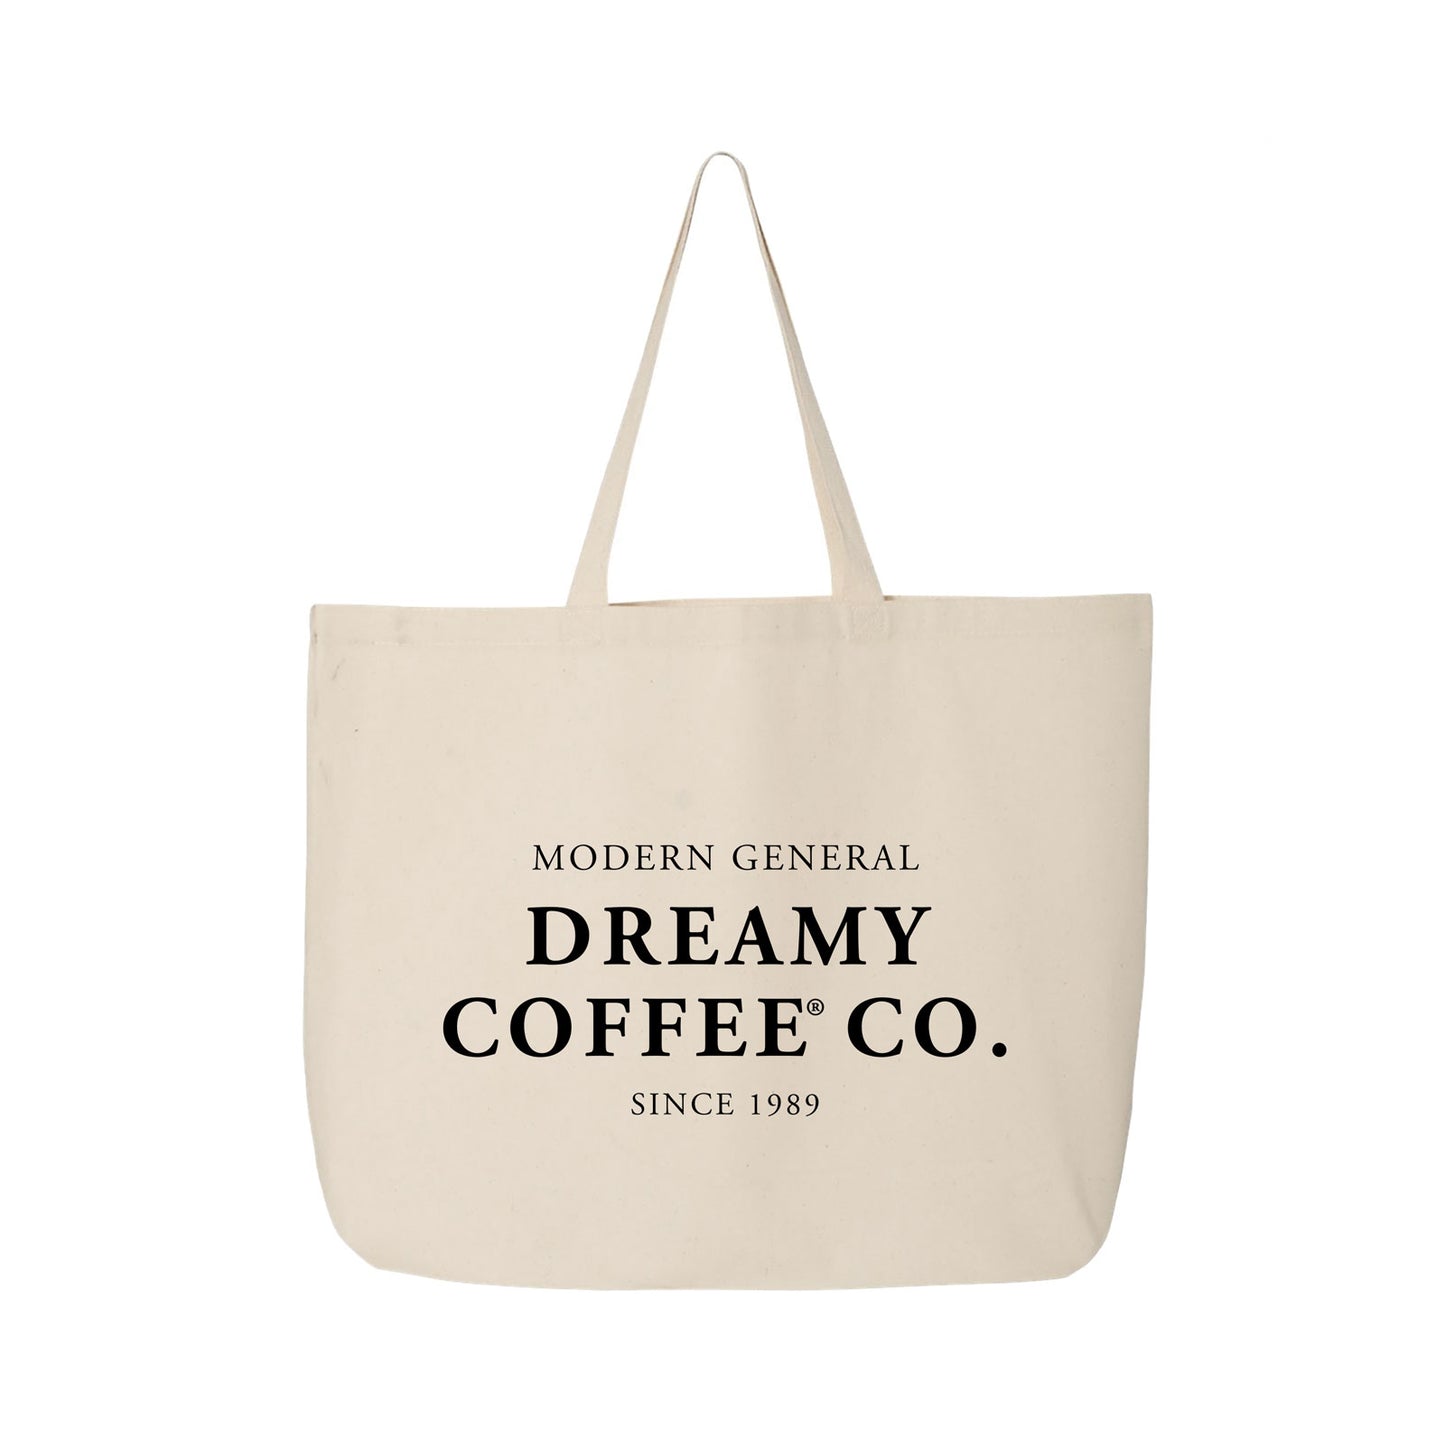 Dreamy Coffee Co. Tote Bag, Limited Edition XL